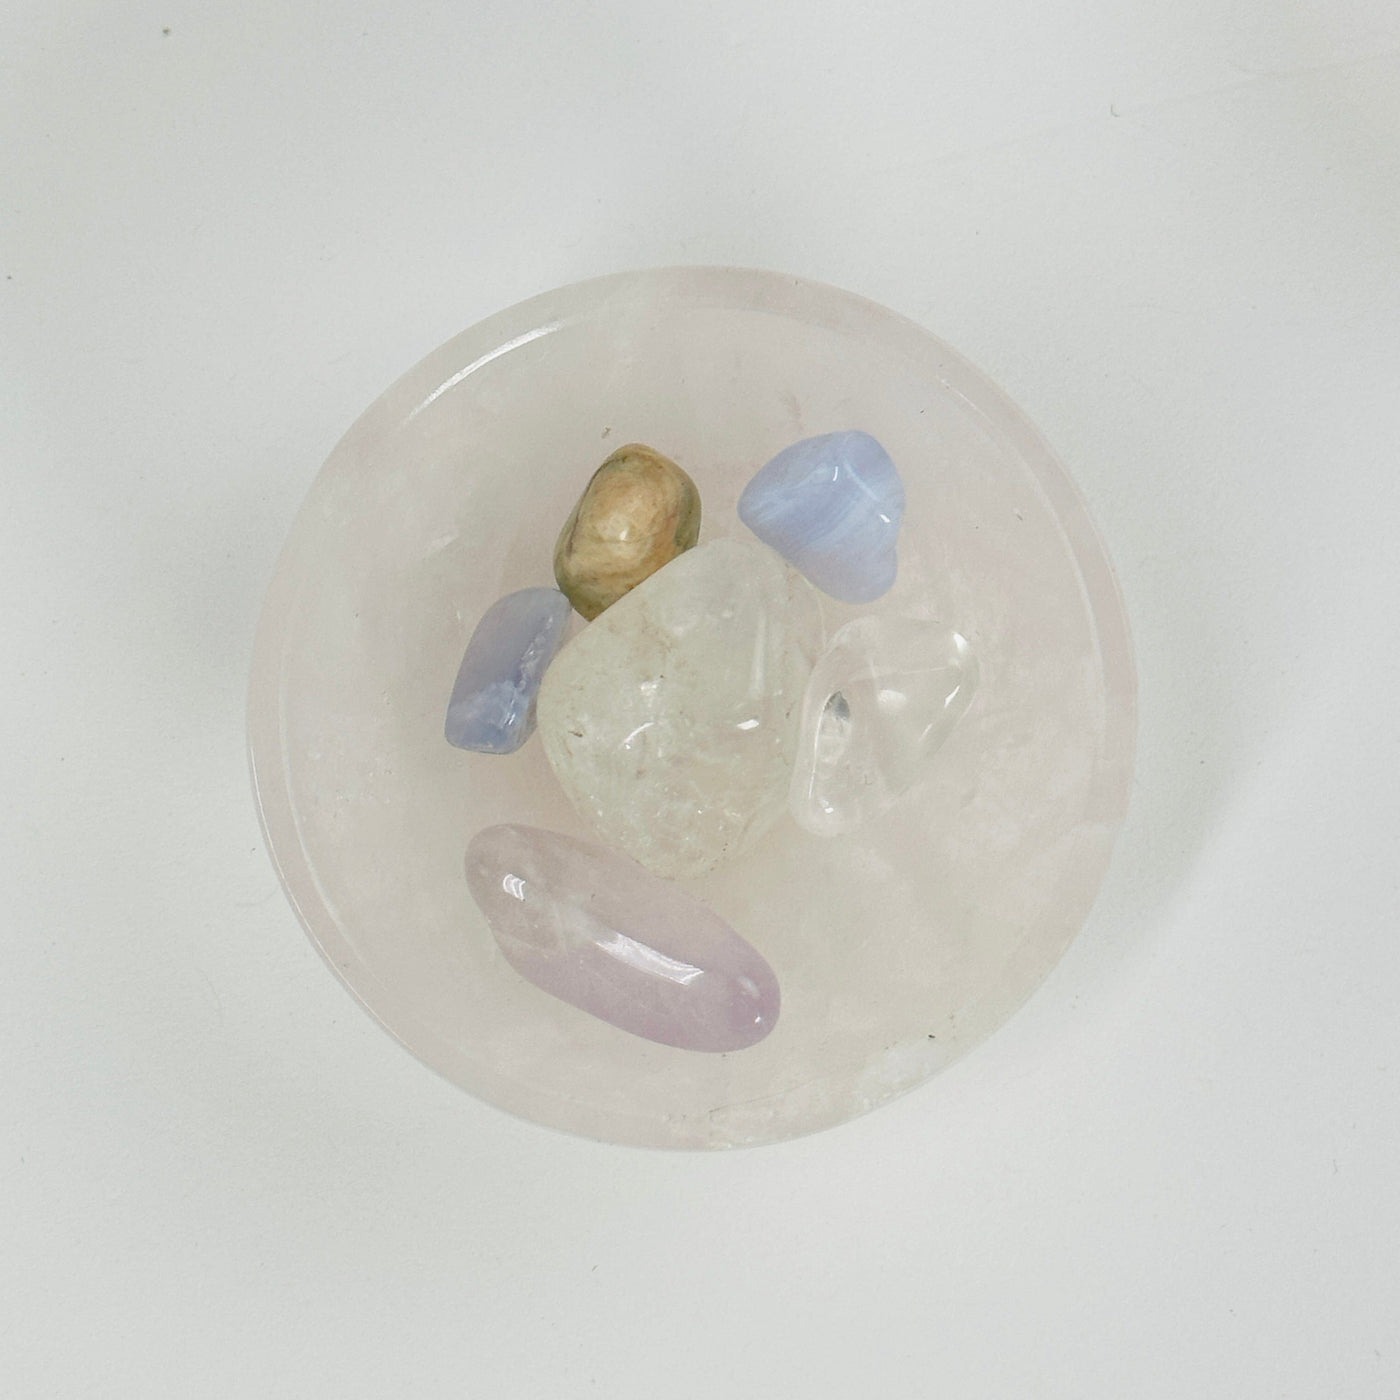 mini rose quartz bowl holding other crystals in it